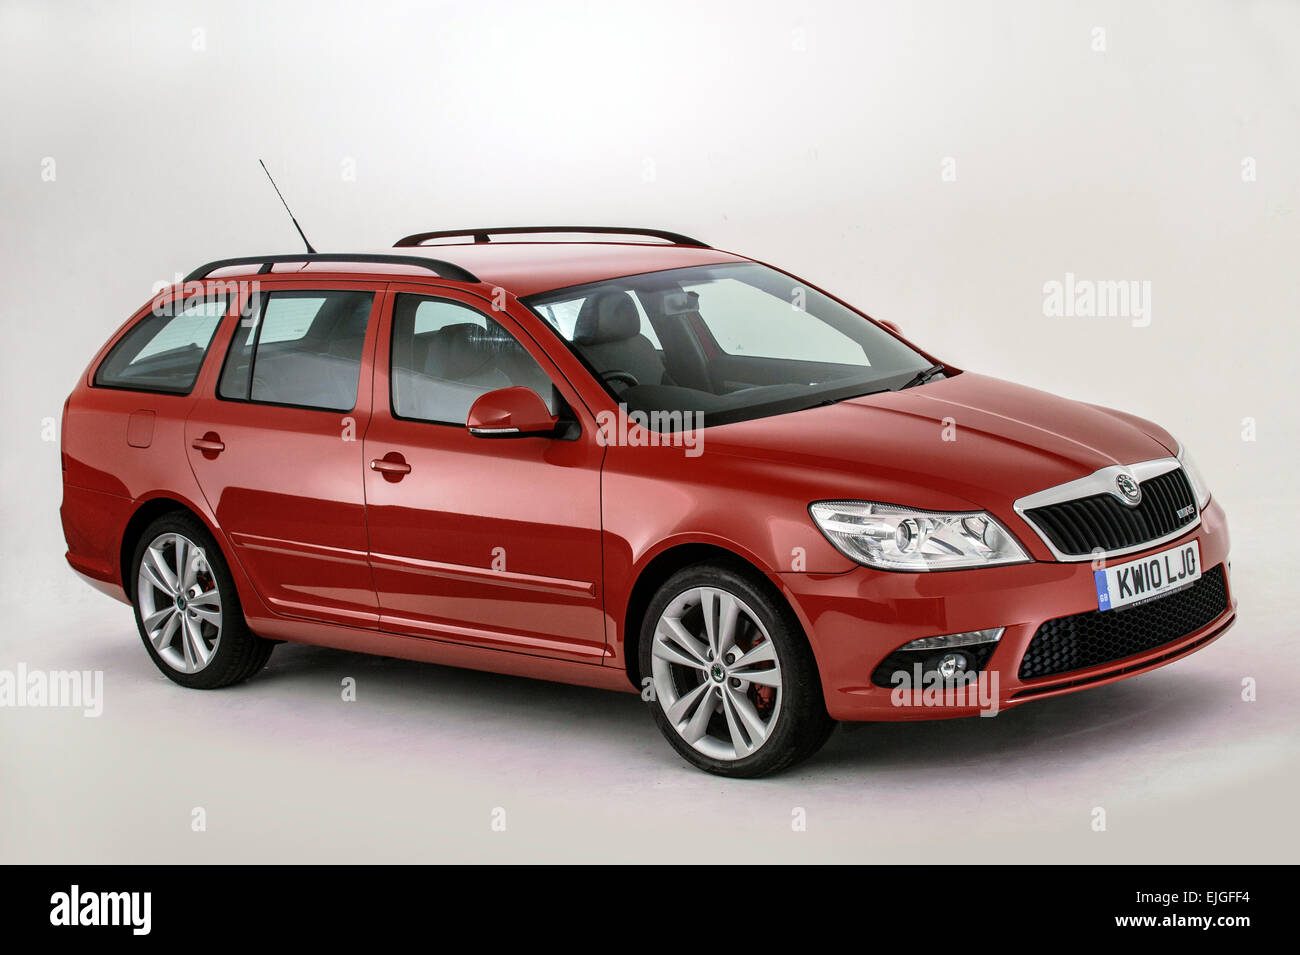 Skoda Octavia Red High Resolution Stock Photography and Images - Alamy